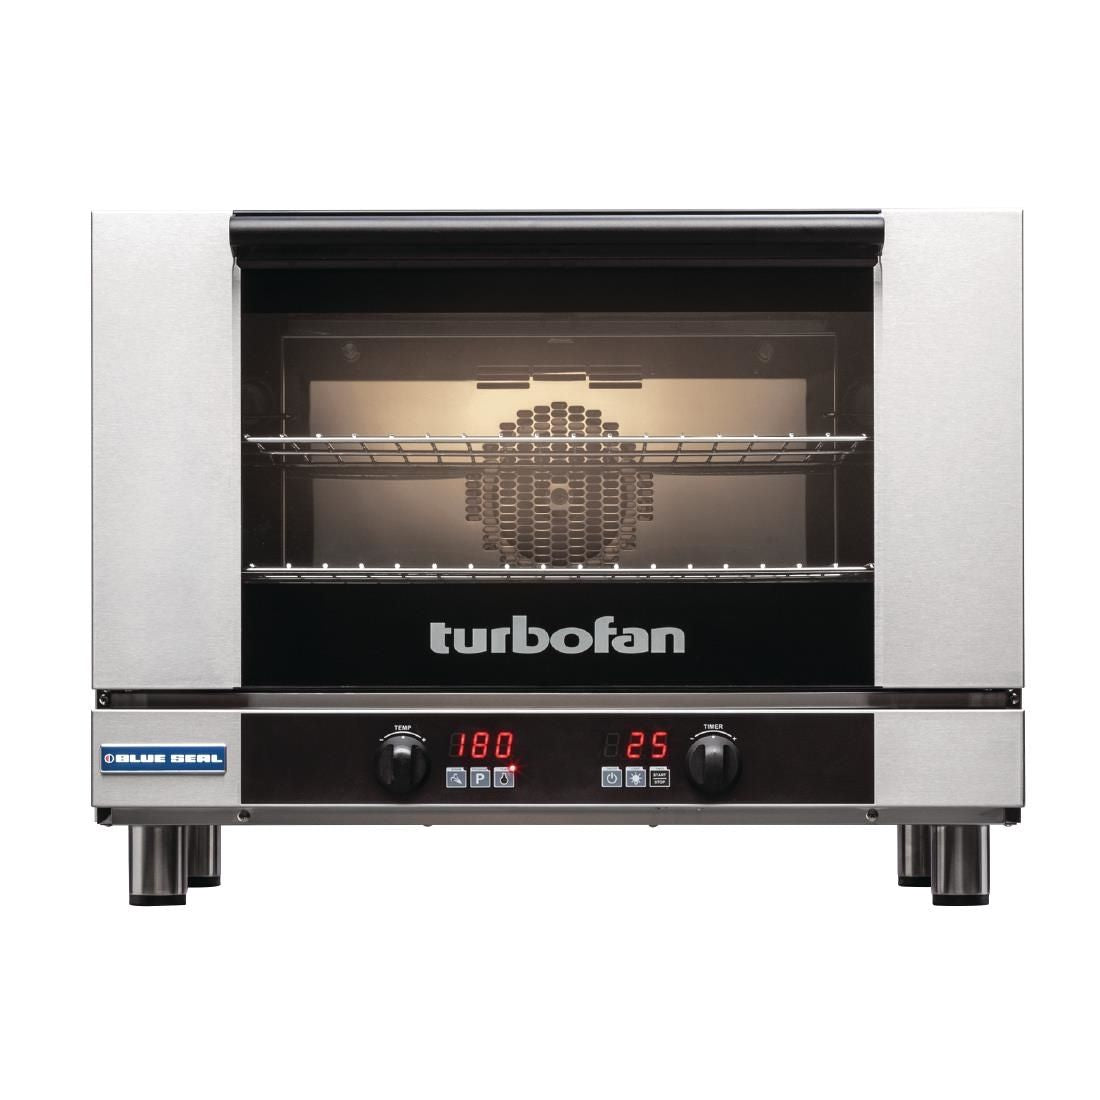 CP995 Blue Seal Turbofan Convection Oven E27D2 JD Catering Equipment Solutions Ltd